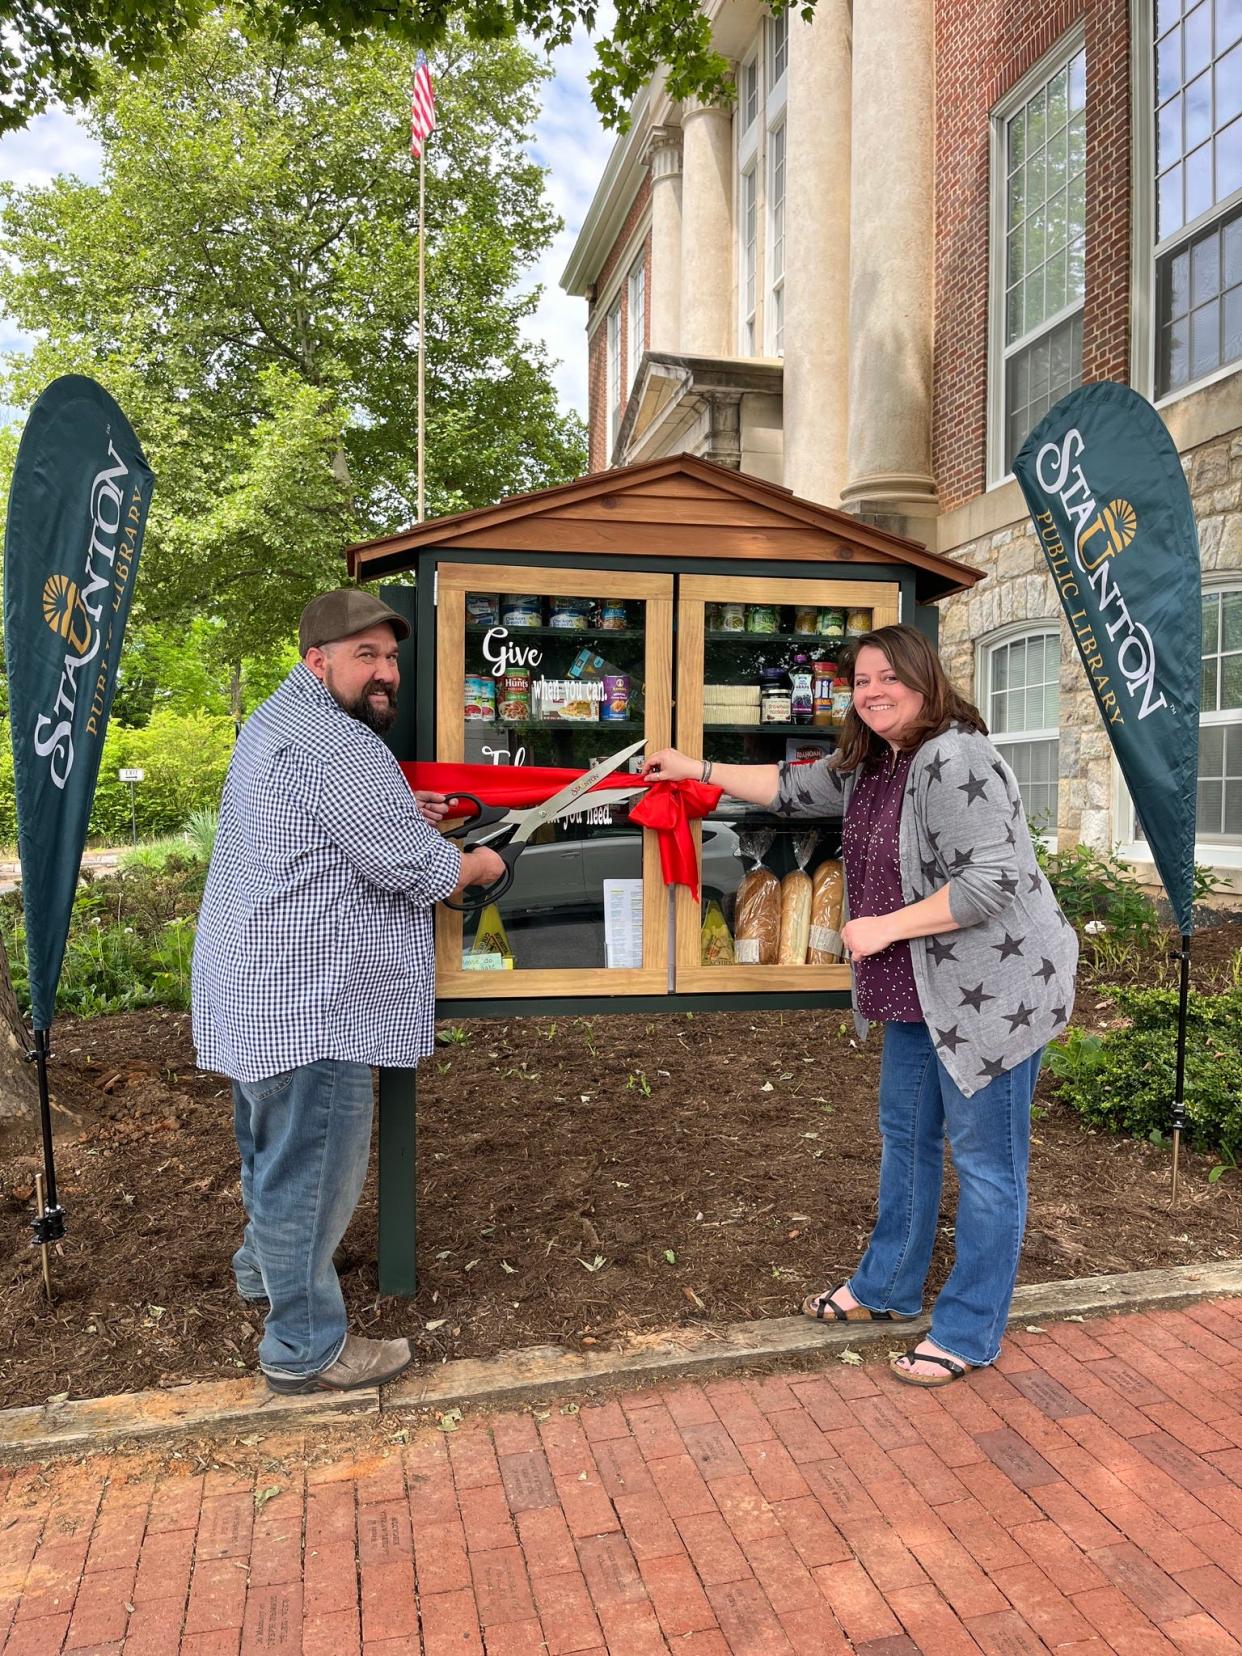 Neighbor Bridge representatives hold oversized scissors as they cut the ribbon to open the pantry.